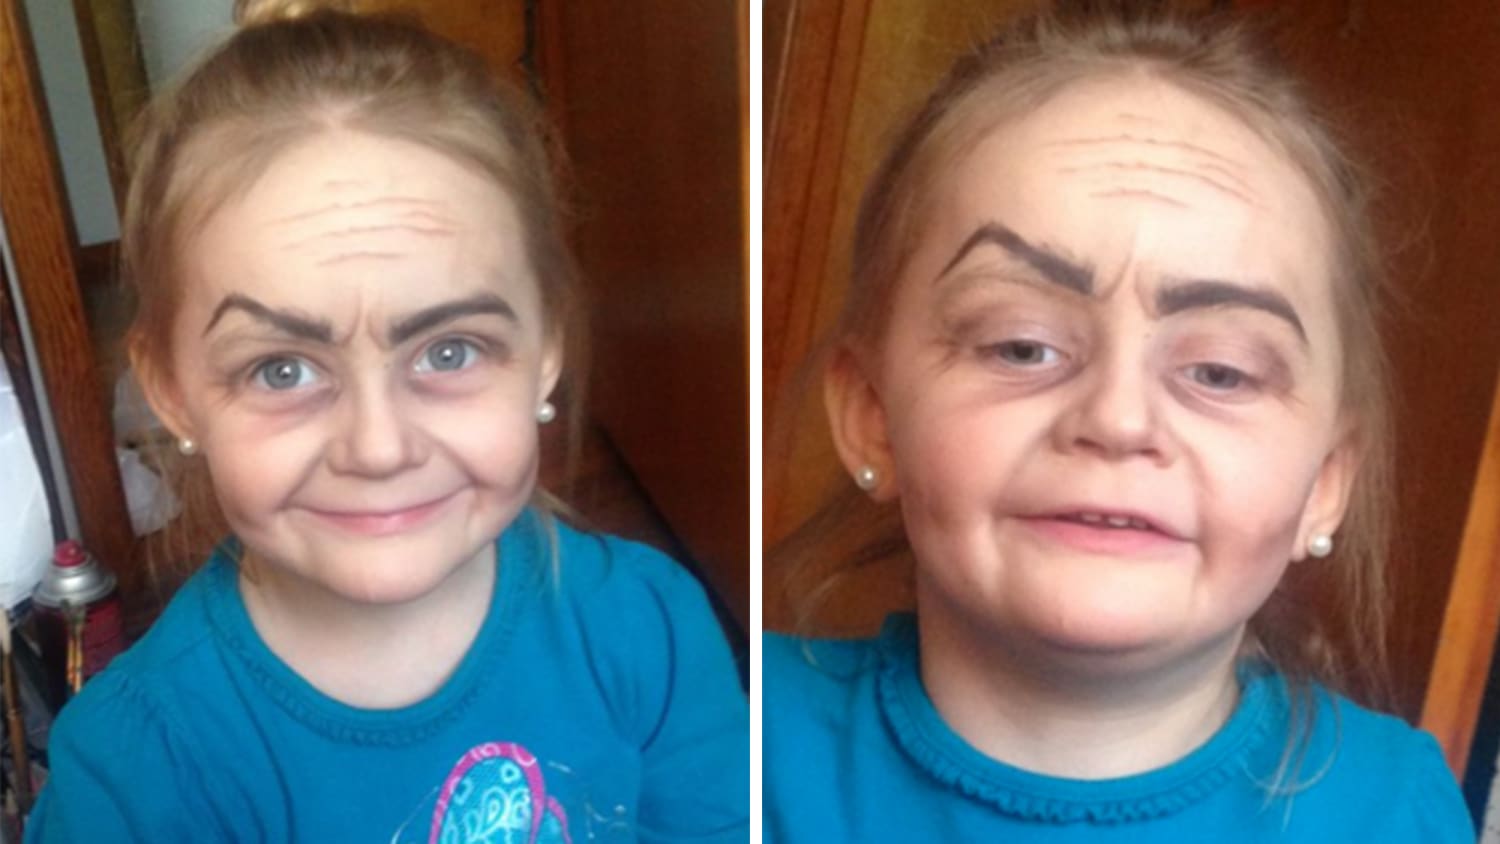 Toddler turned into little old lady by makeup-wielding ...